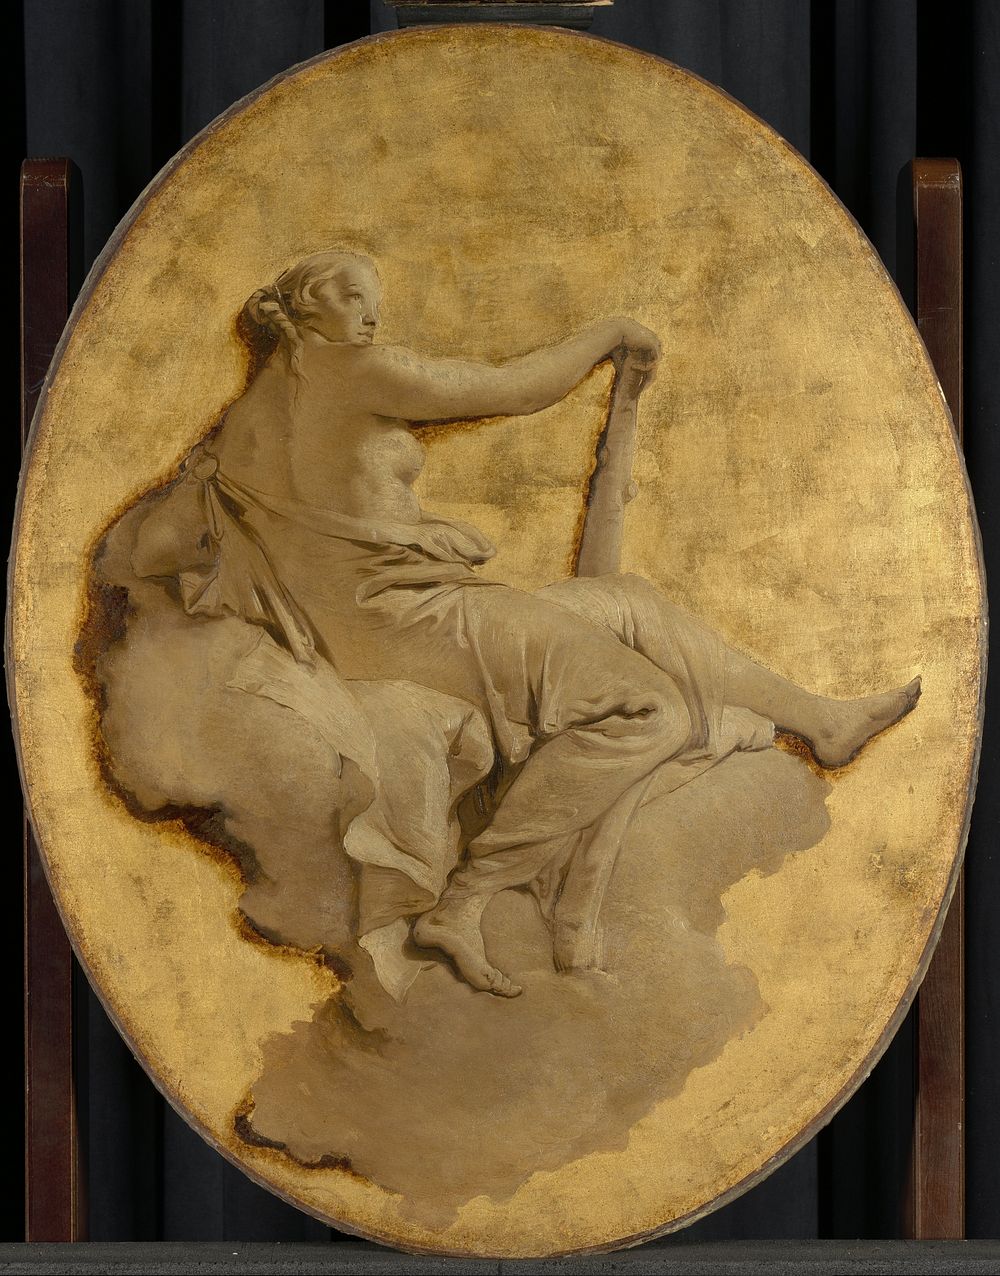 Allegorical Figure of a Woman with a Club (Fortitude?) (c. 1740 - 1750) by Giovanni Battista Tiepolo